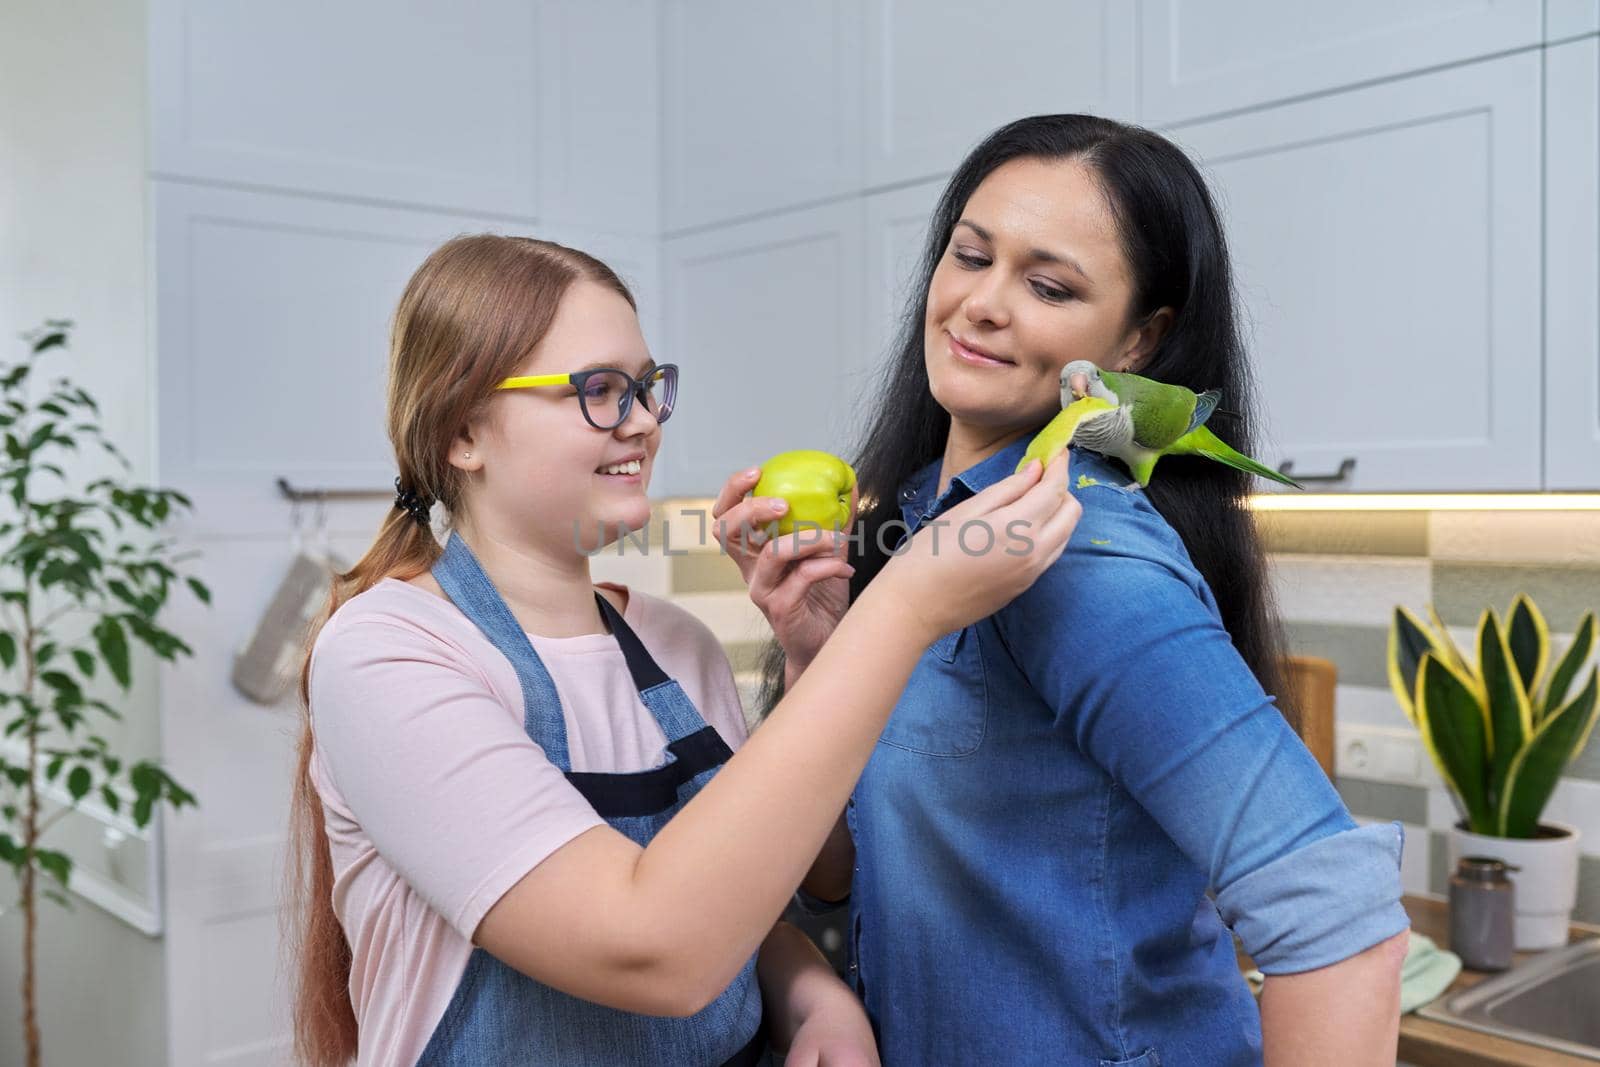 Friendly cheerful family, portrait of mom and teenage daughter, with green parrot. Girl feeding parrot pet sitting on shoulder with apple, kitchen house background